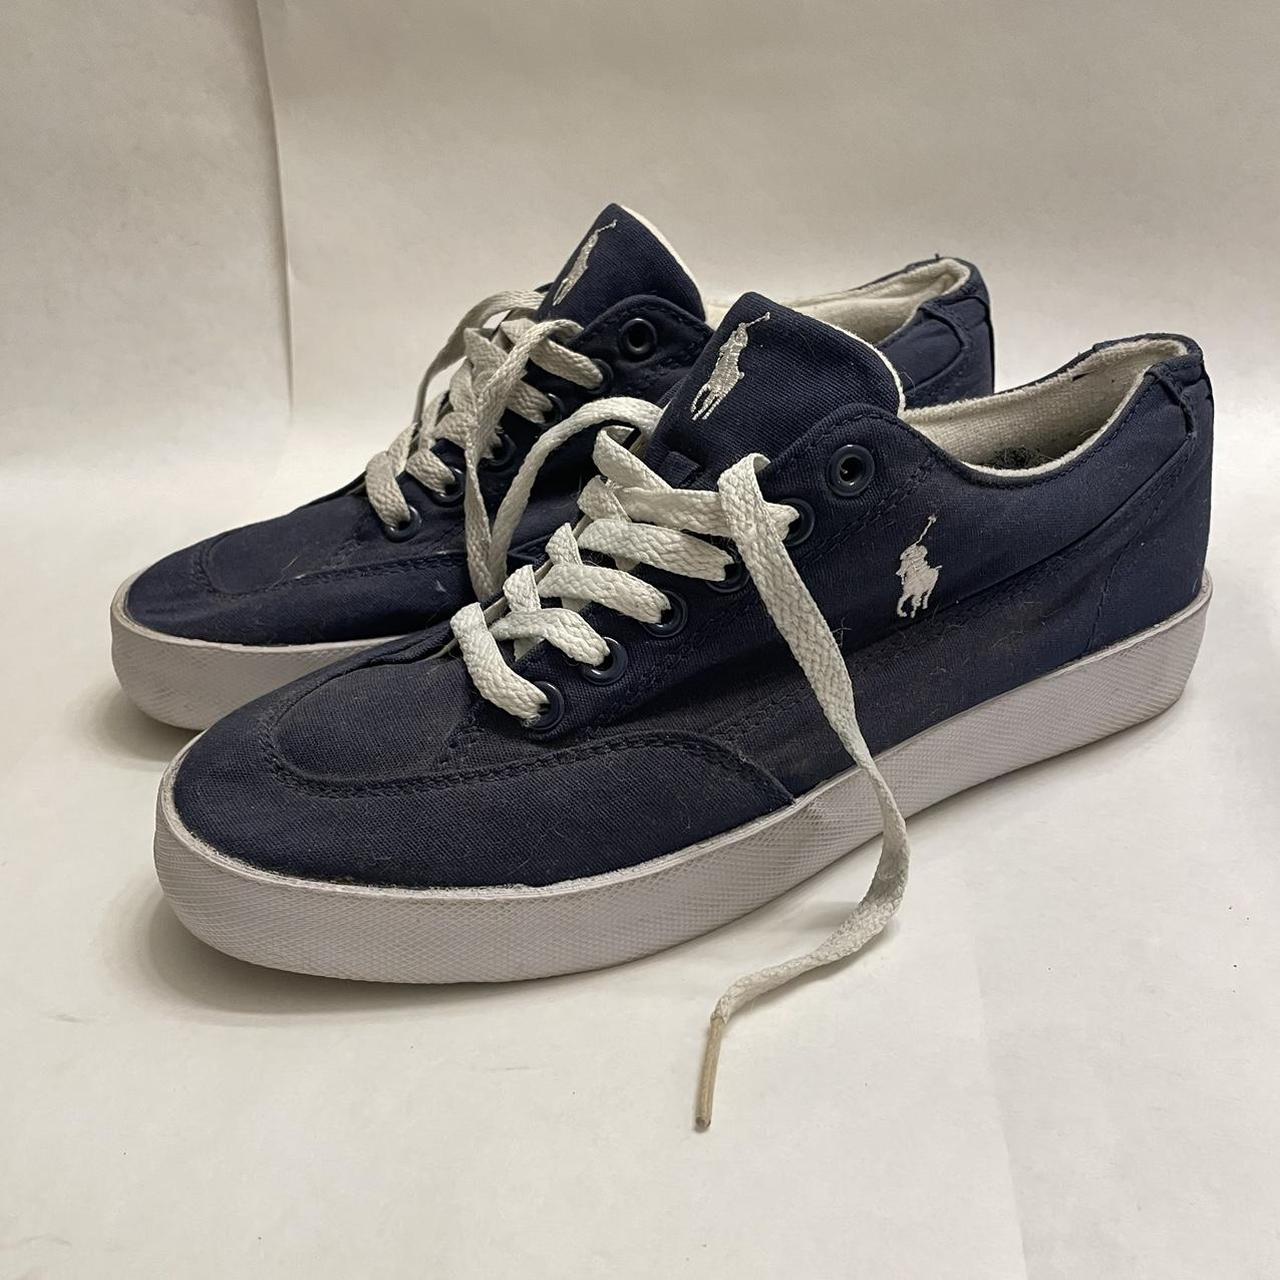 Buy U.S. Polo Assn. Canvas Lace Up Brentt 2.0 Sneakers - NNNOW.com